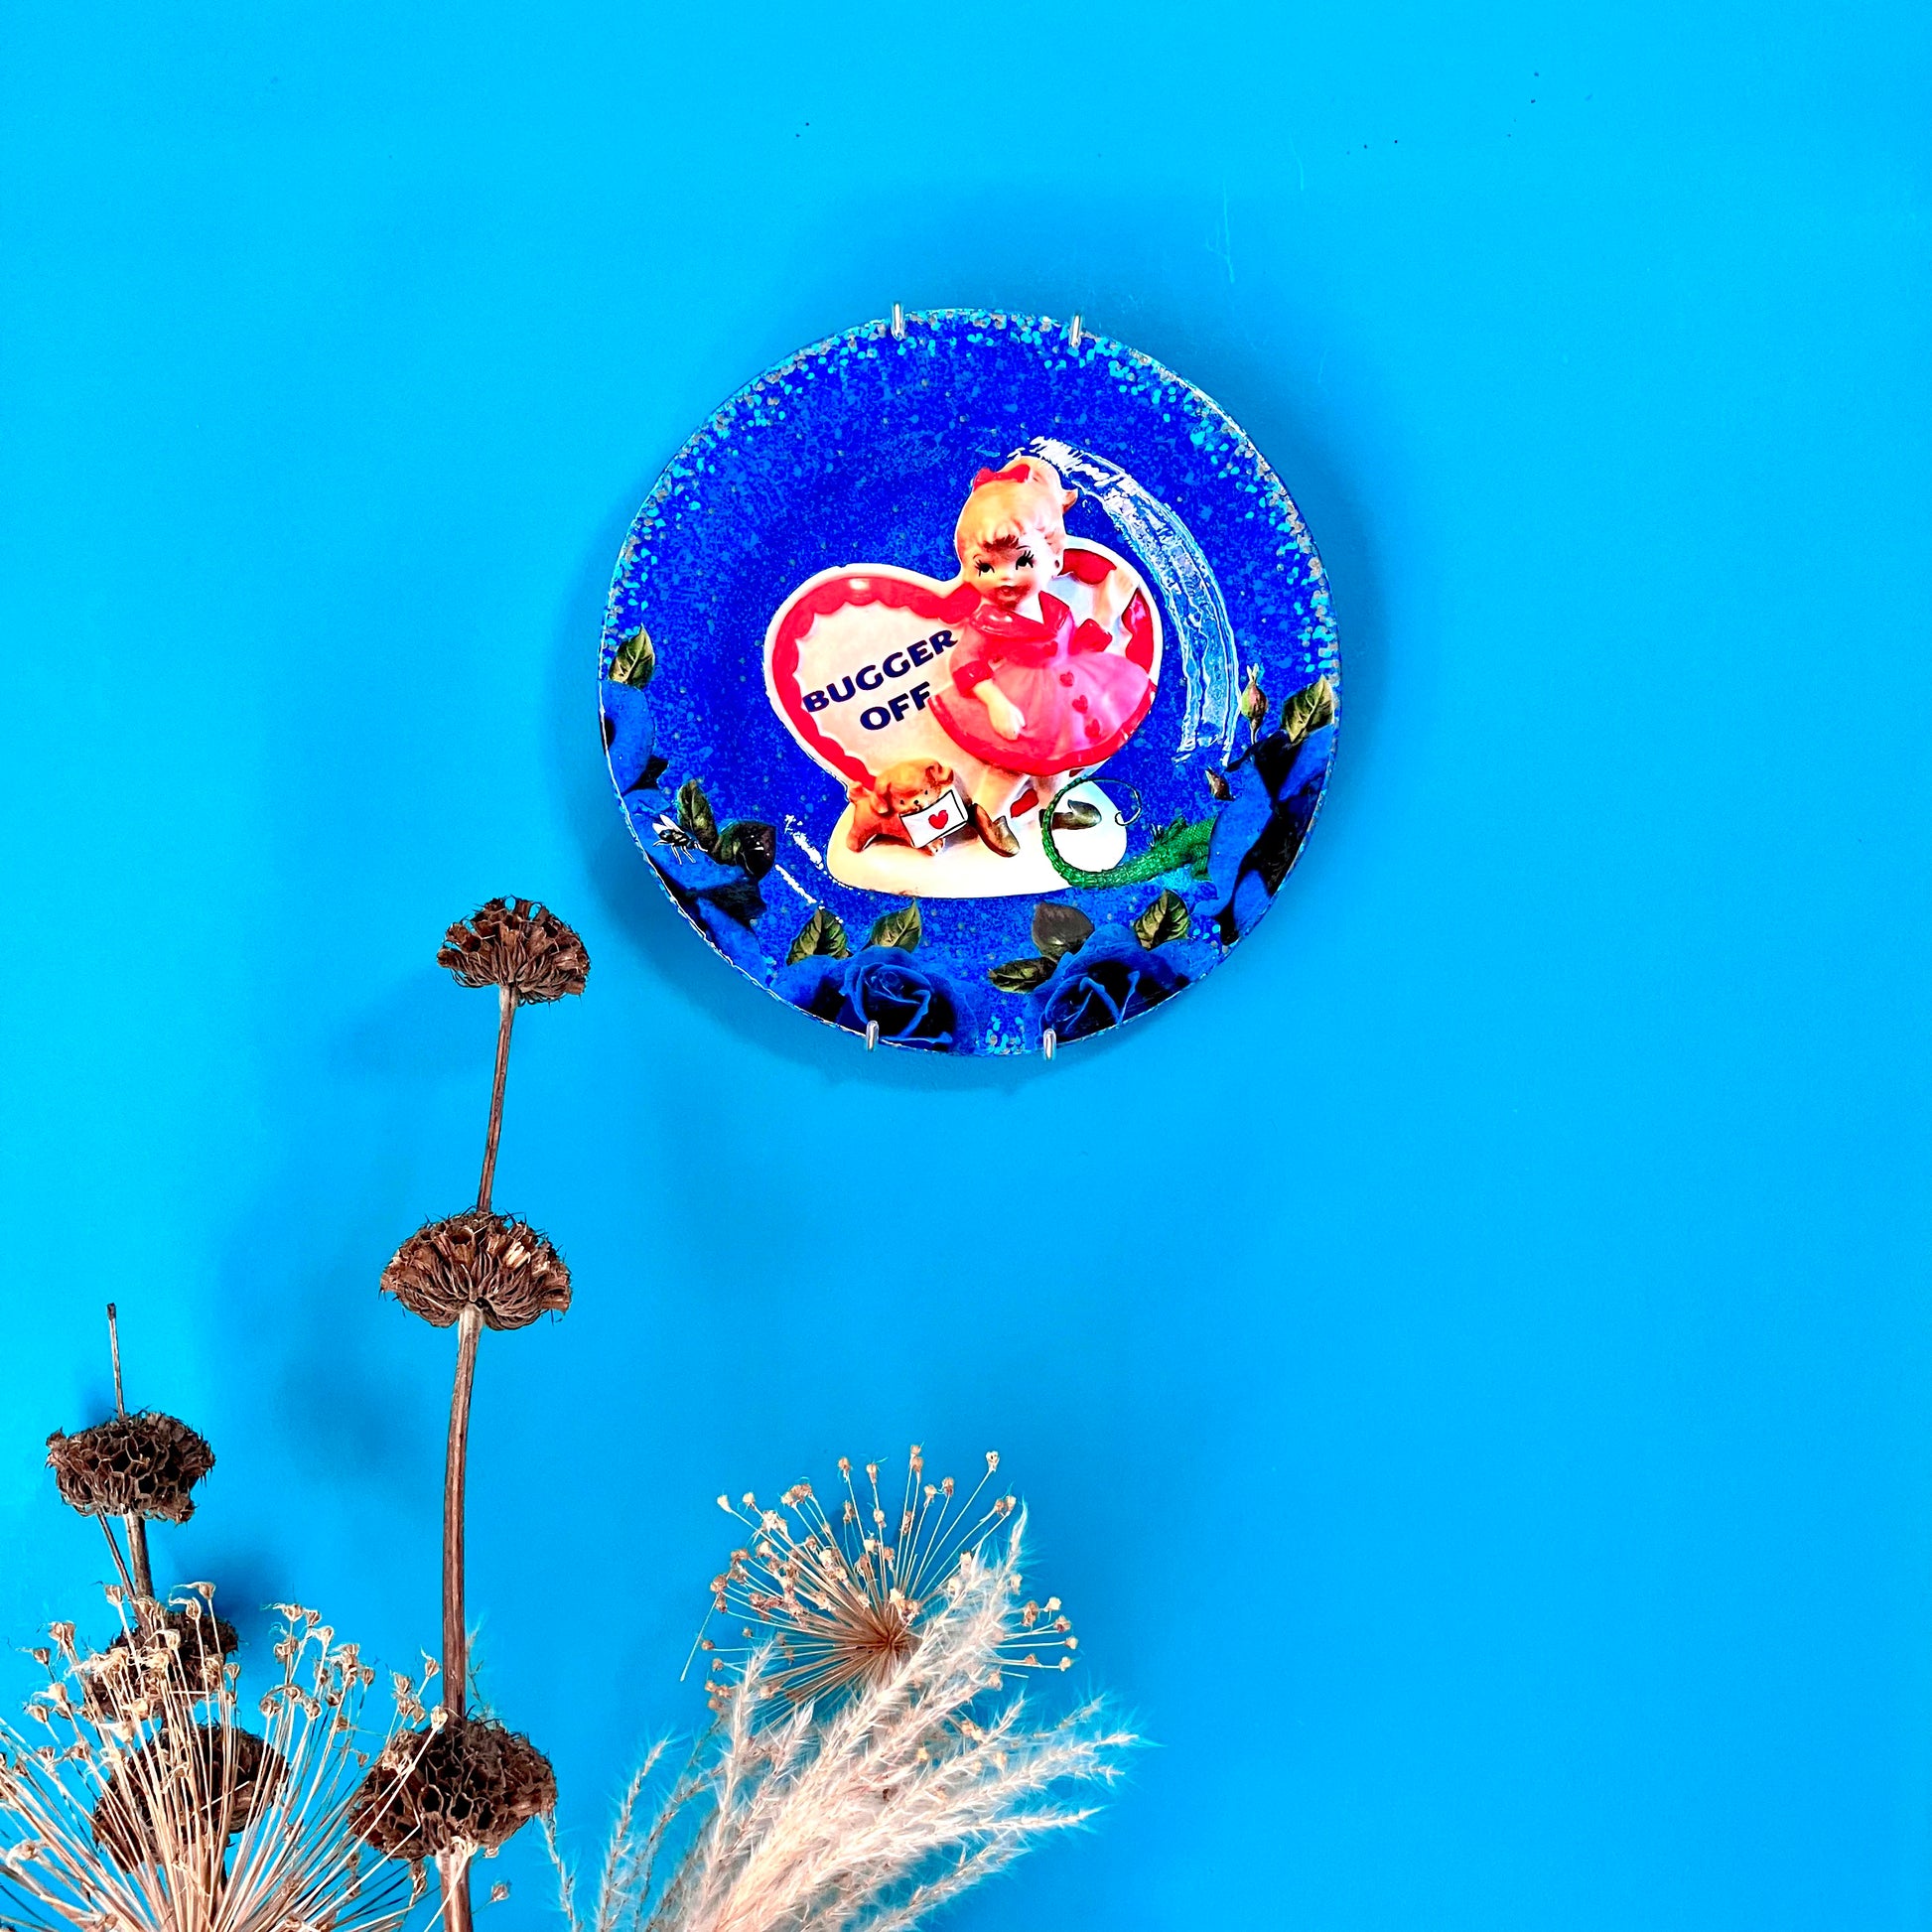 "Bugger Off" blue Wall Plate by House of Frisson, featuring a kitsch vintage porcelain figure among blue roses and a lizard and a fly. Plate hanging on a blue wall.